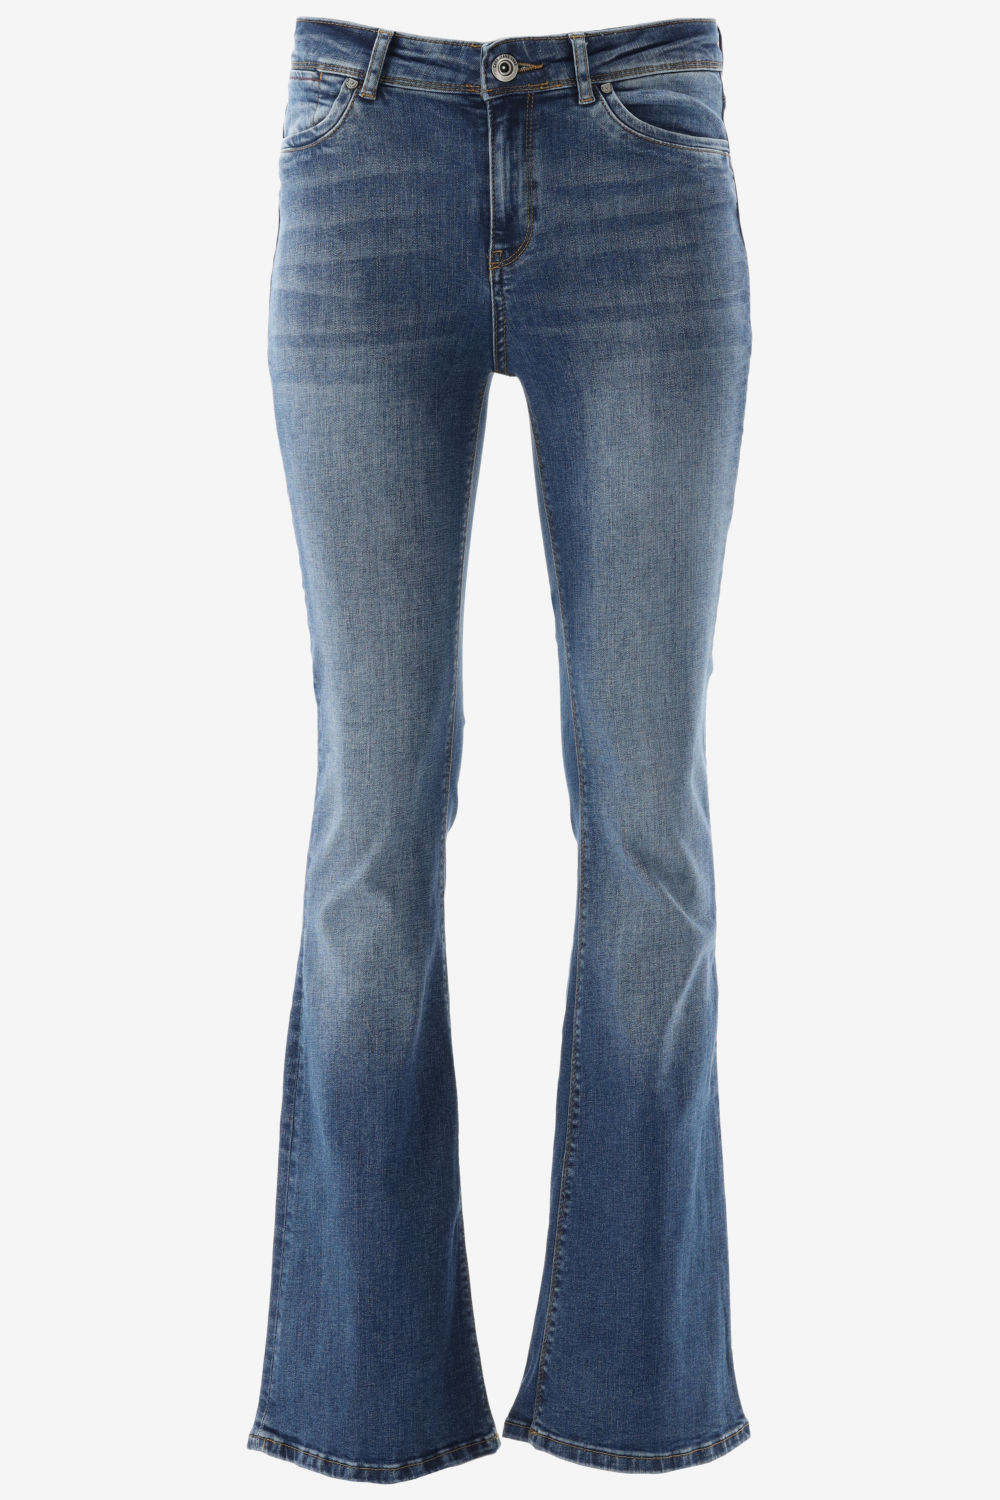 Cars Jeans Michelle Flare Den 78627 Stone Used Dames Maat - W29 X L30